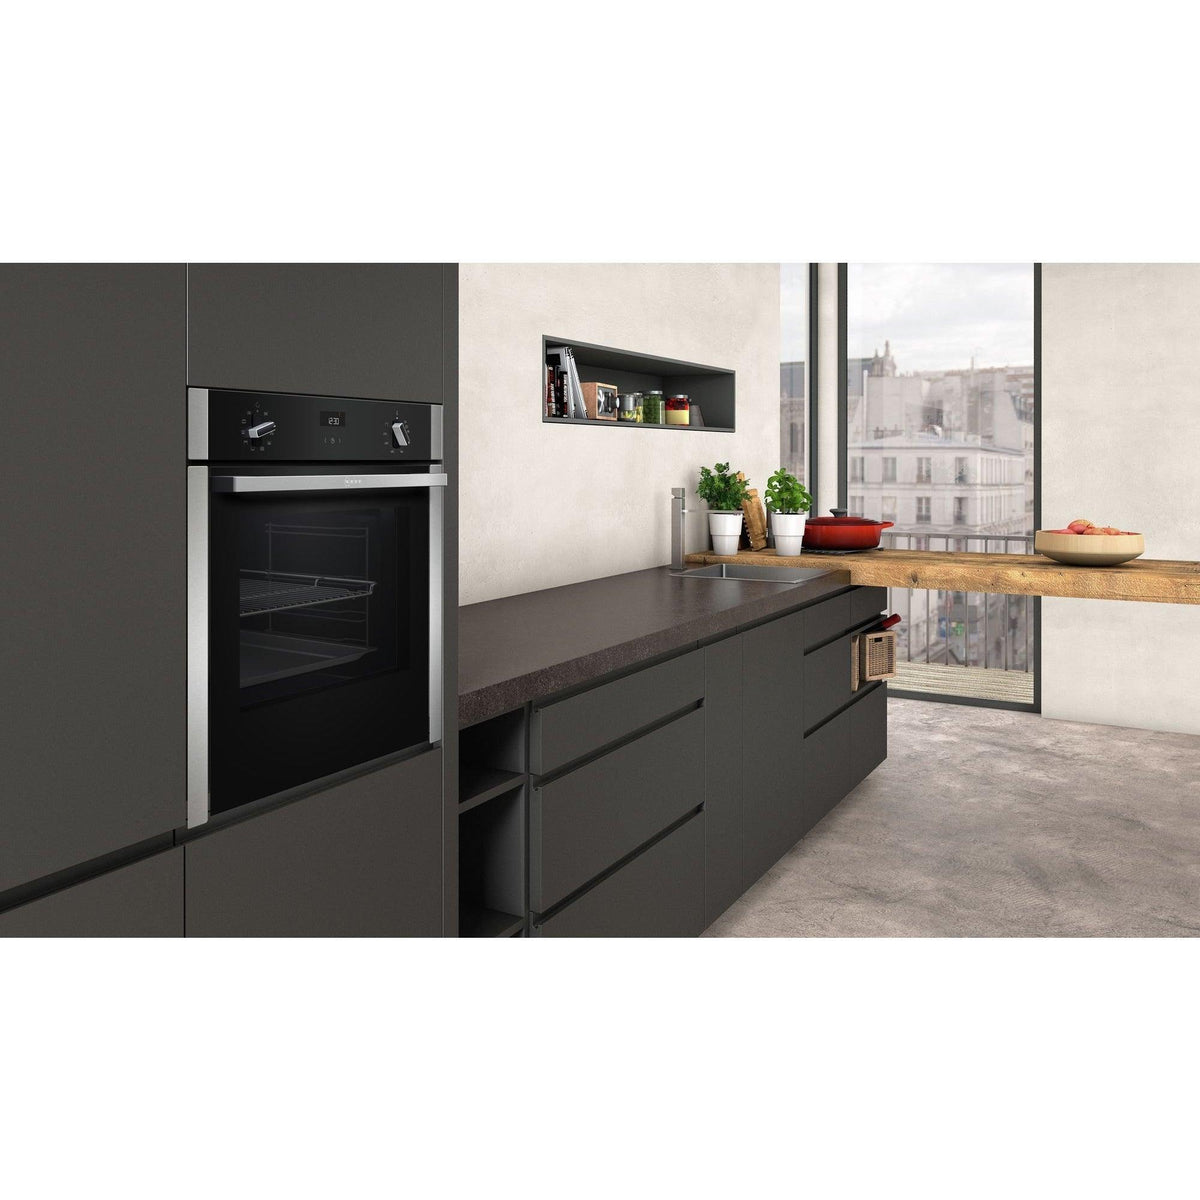 Neff N50 Built-In Electric Single Oven - Stainless Steel | B1ACE4HN0B from DID Electrical - guaranteed Irish, guaranteed quality service. (6890781671612)